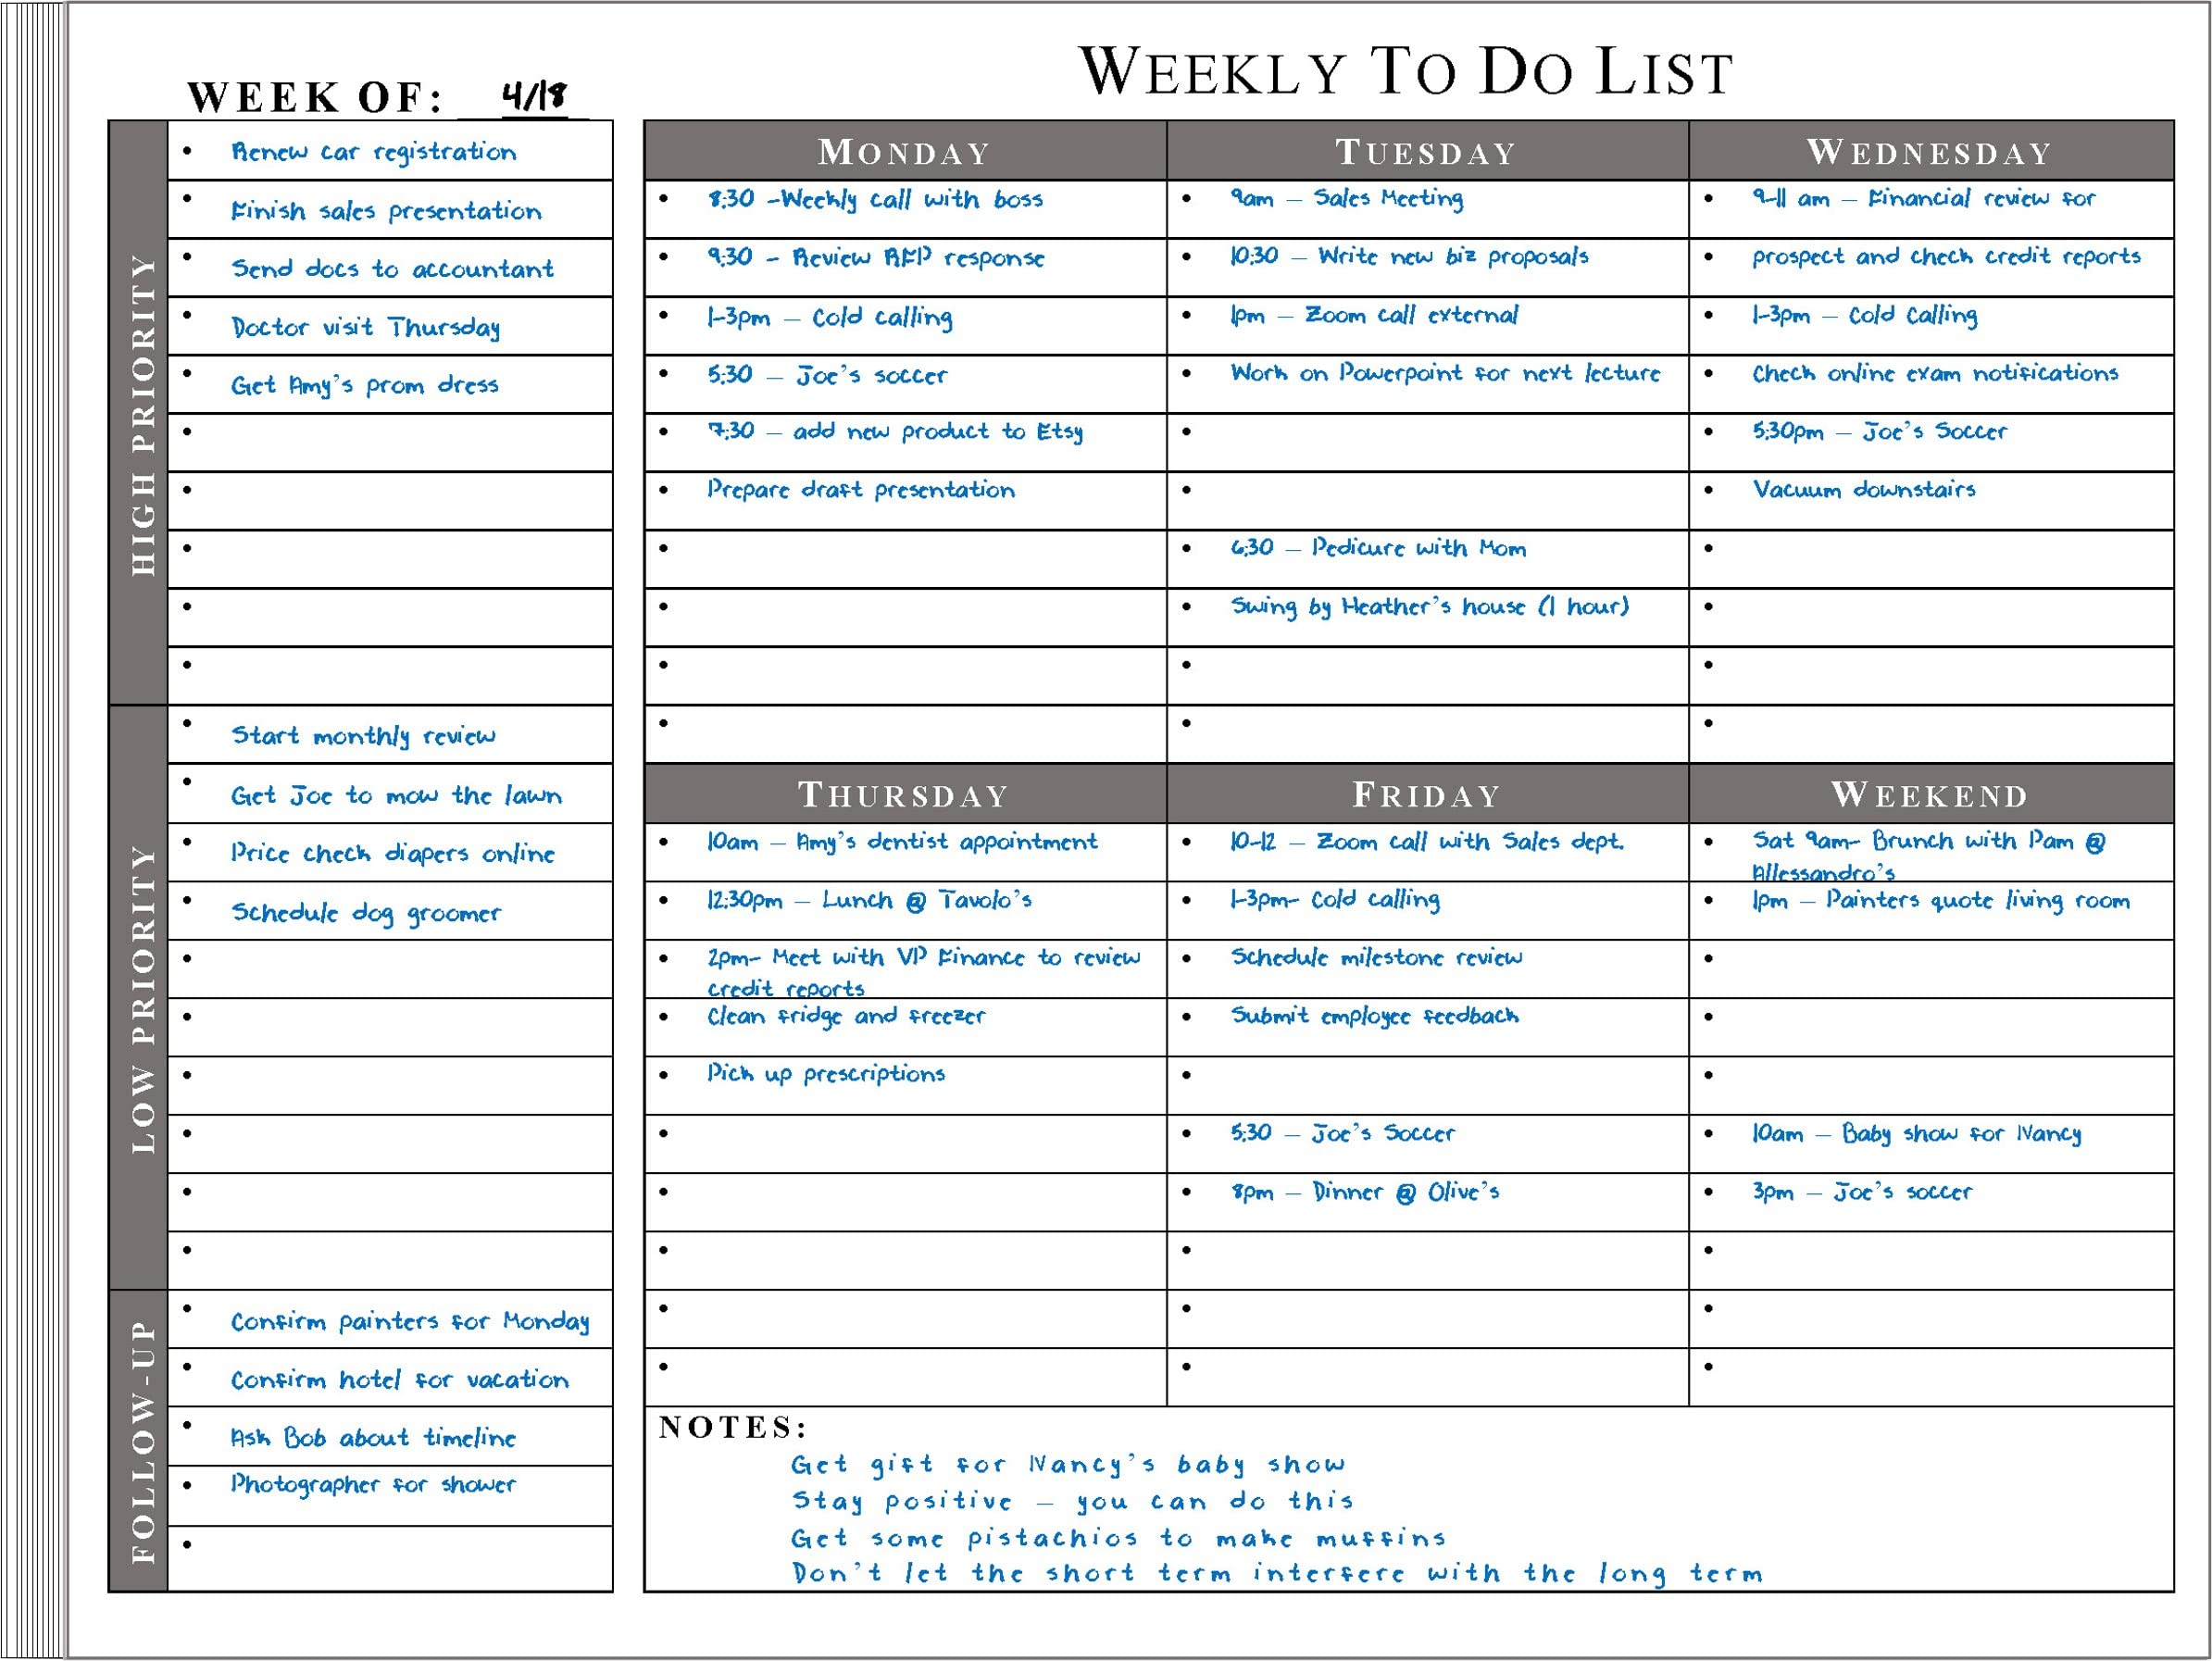 Checklist or calendar with checkboxes